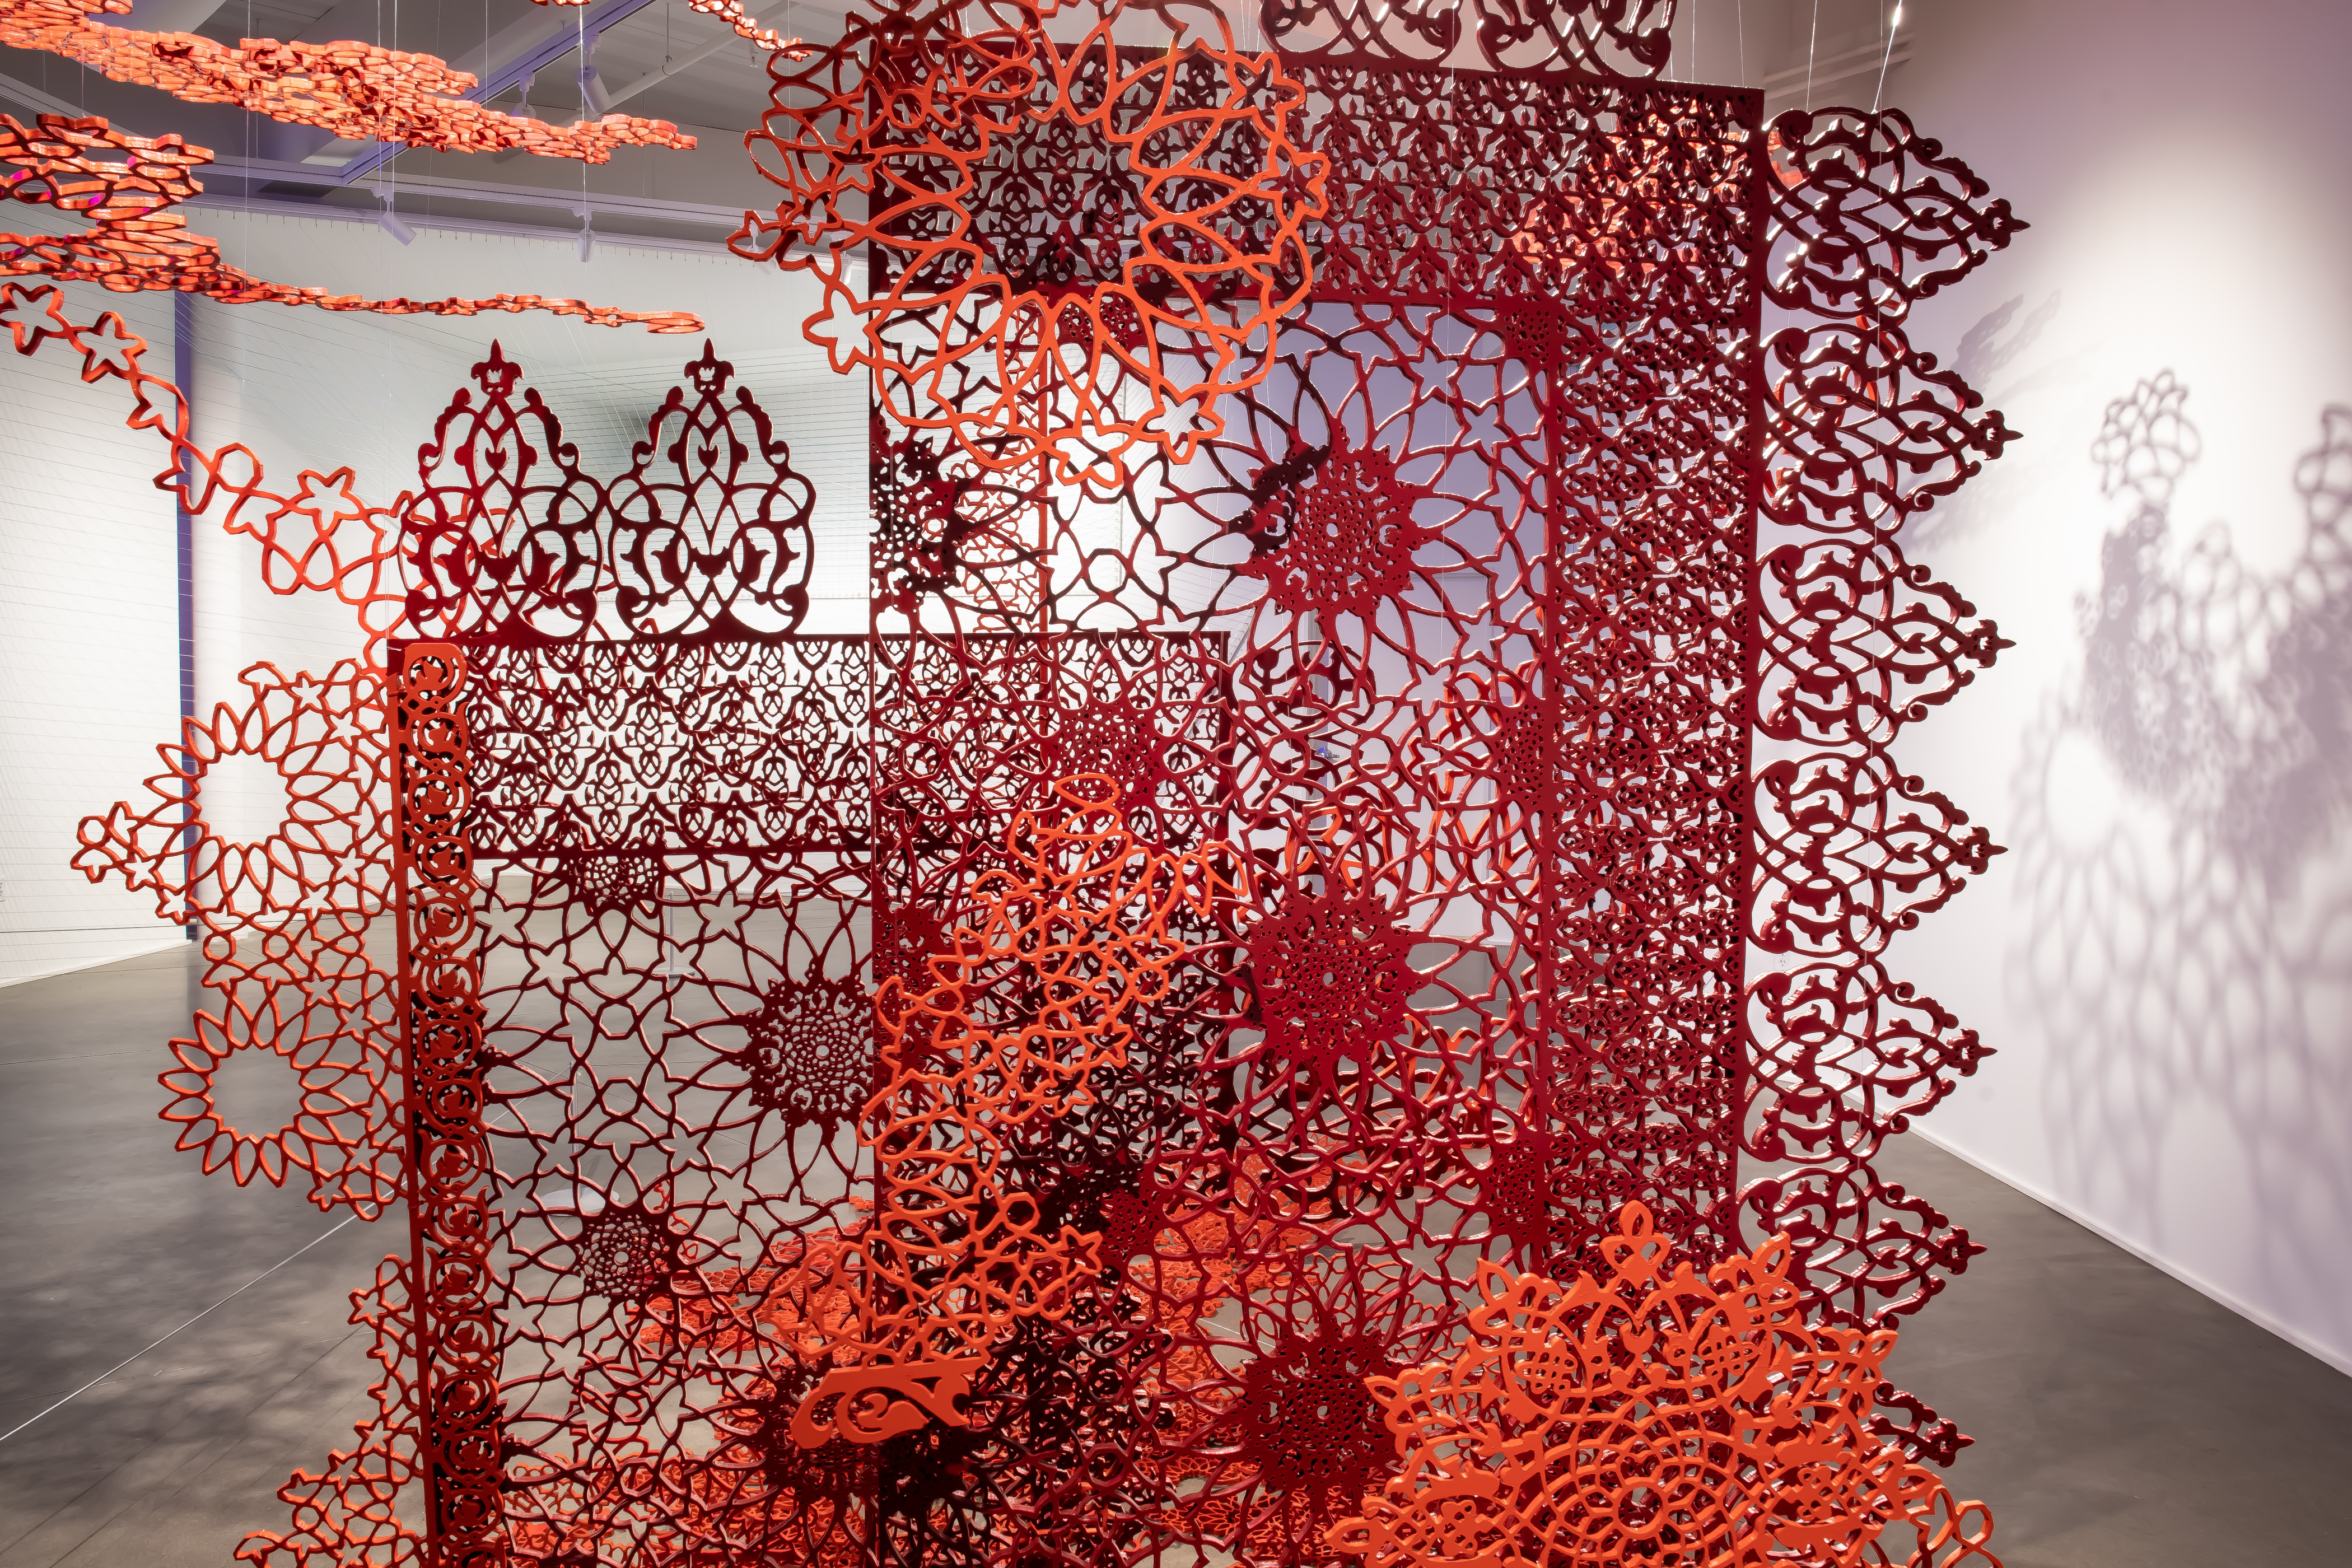 Red, patterned, screen printed pieces stand and suspend from the ceiling, some cut into fragments and some overlapping to create different patterns. There are shadows on the wall, showing similar pattern details from the pieces.